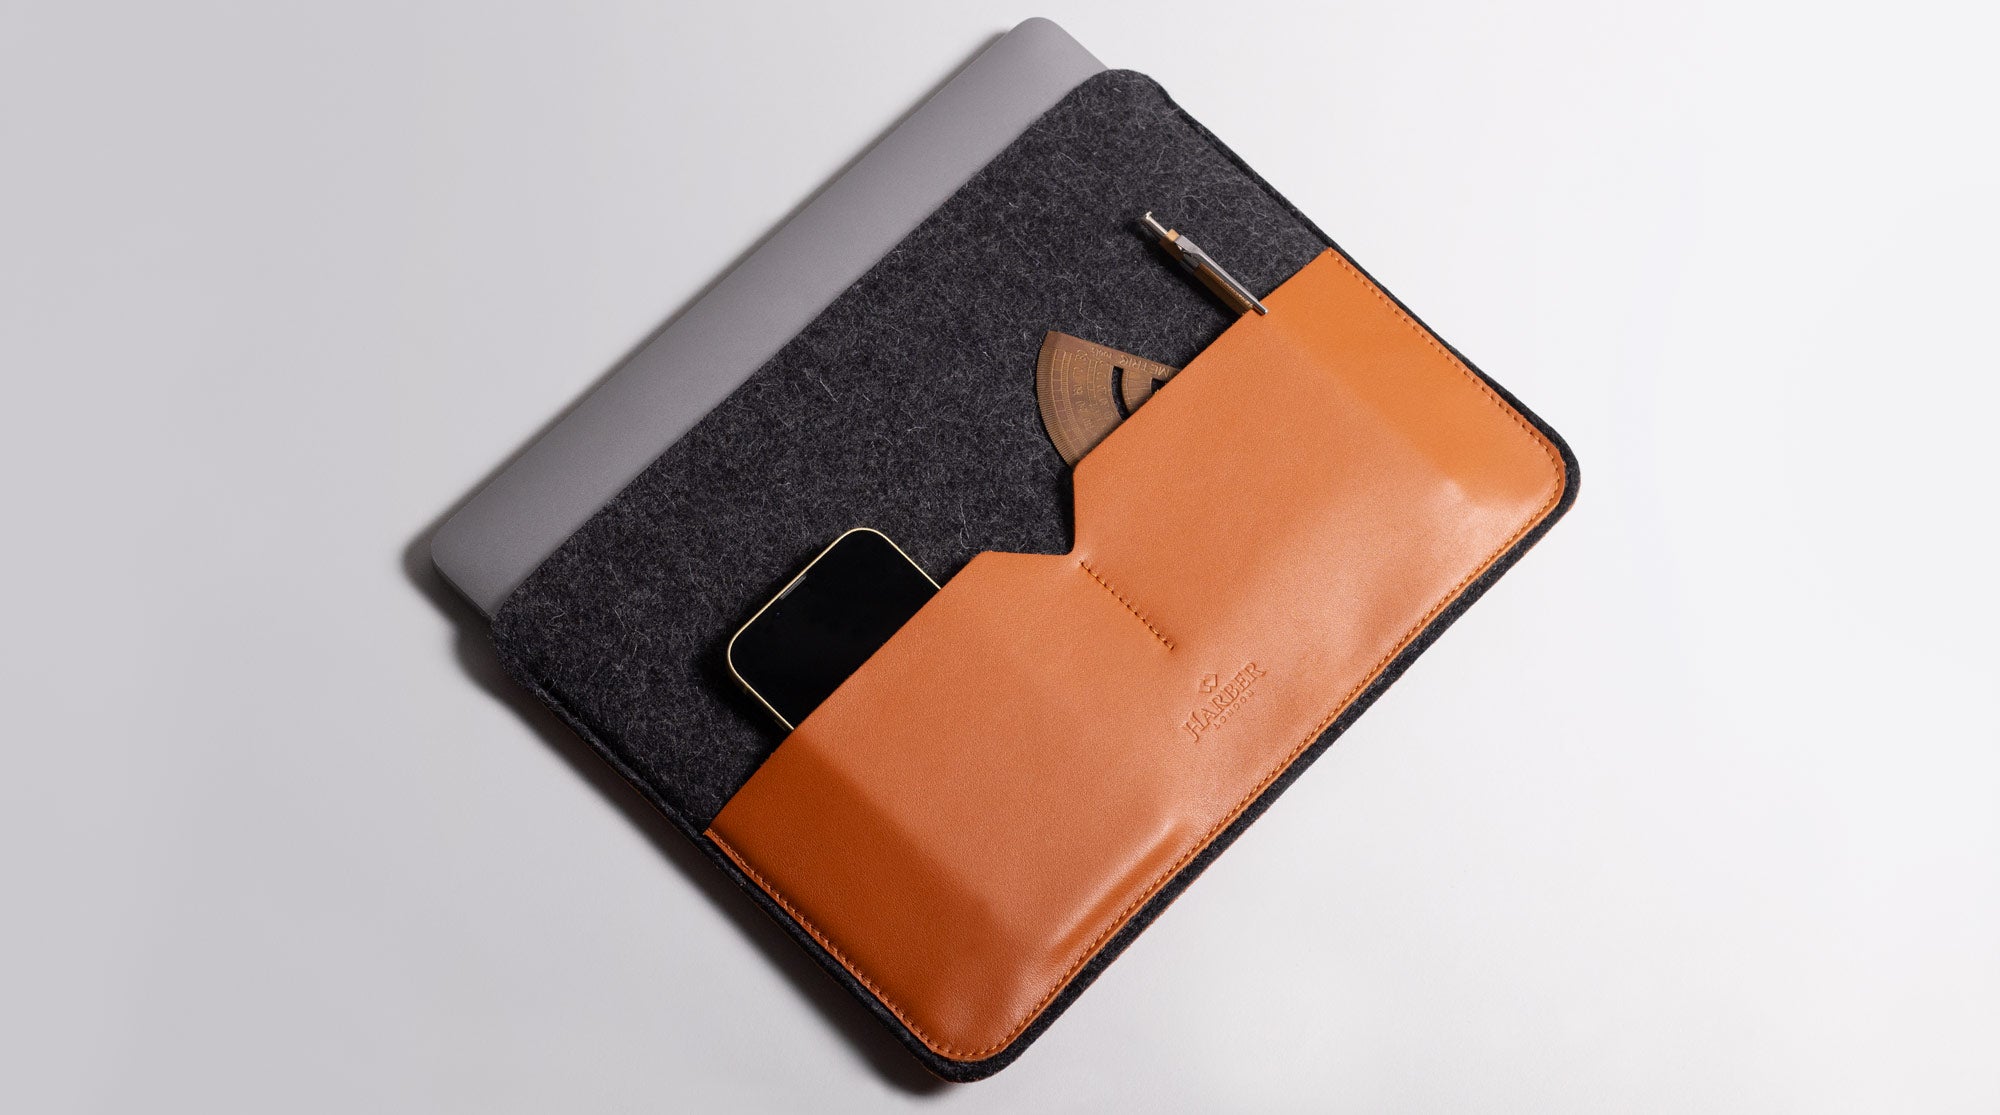 Leather and felt MacBook Sleeve case with front pockets for your EDC